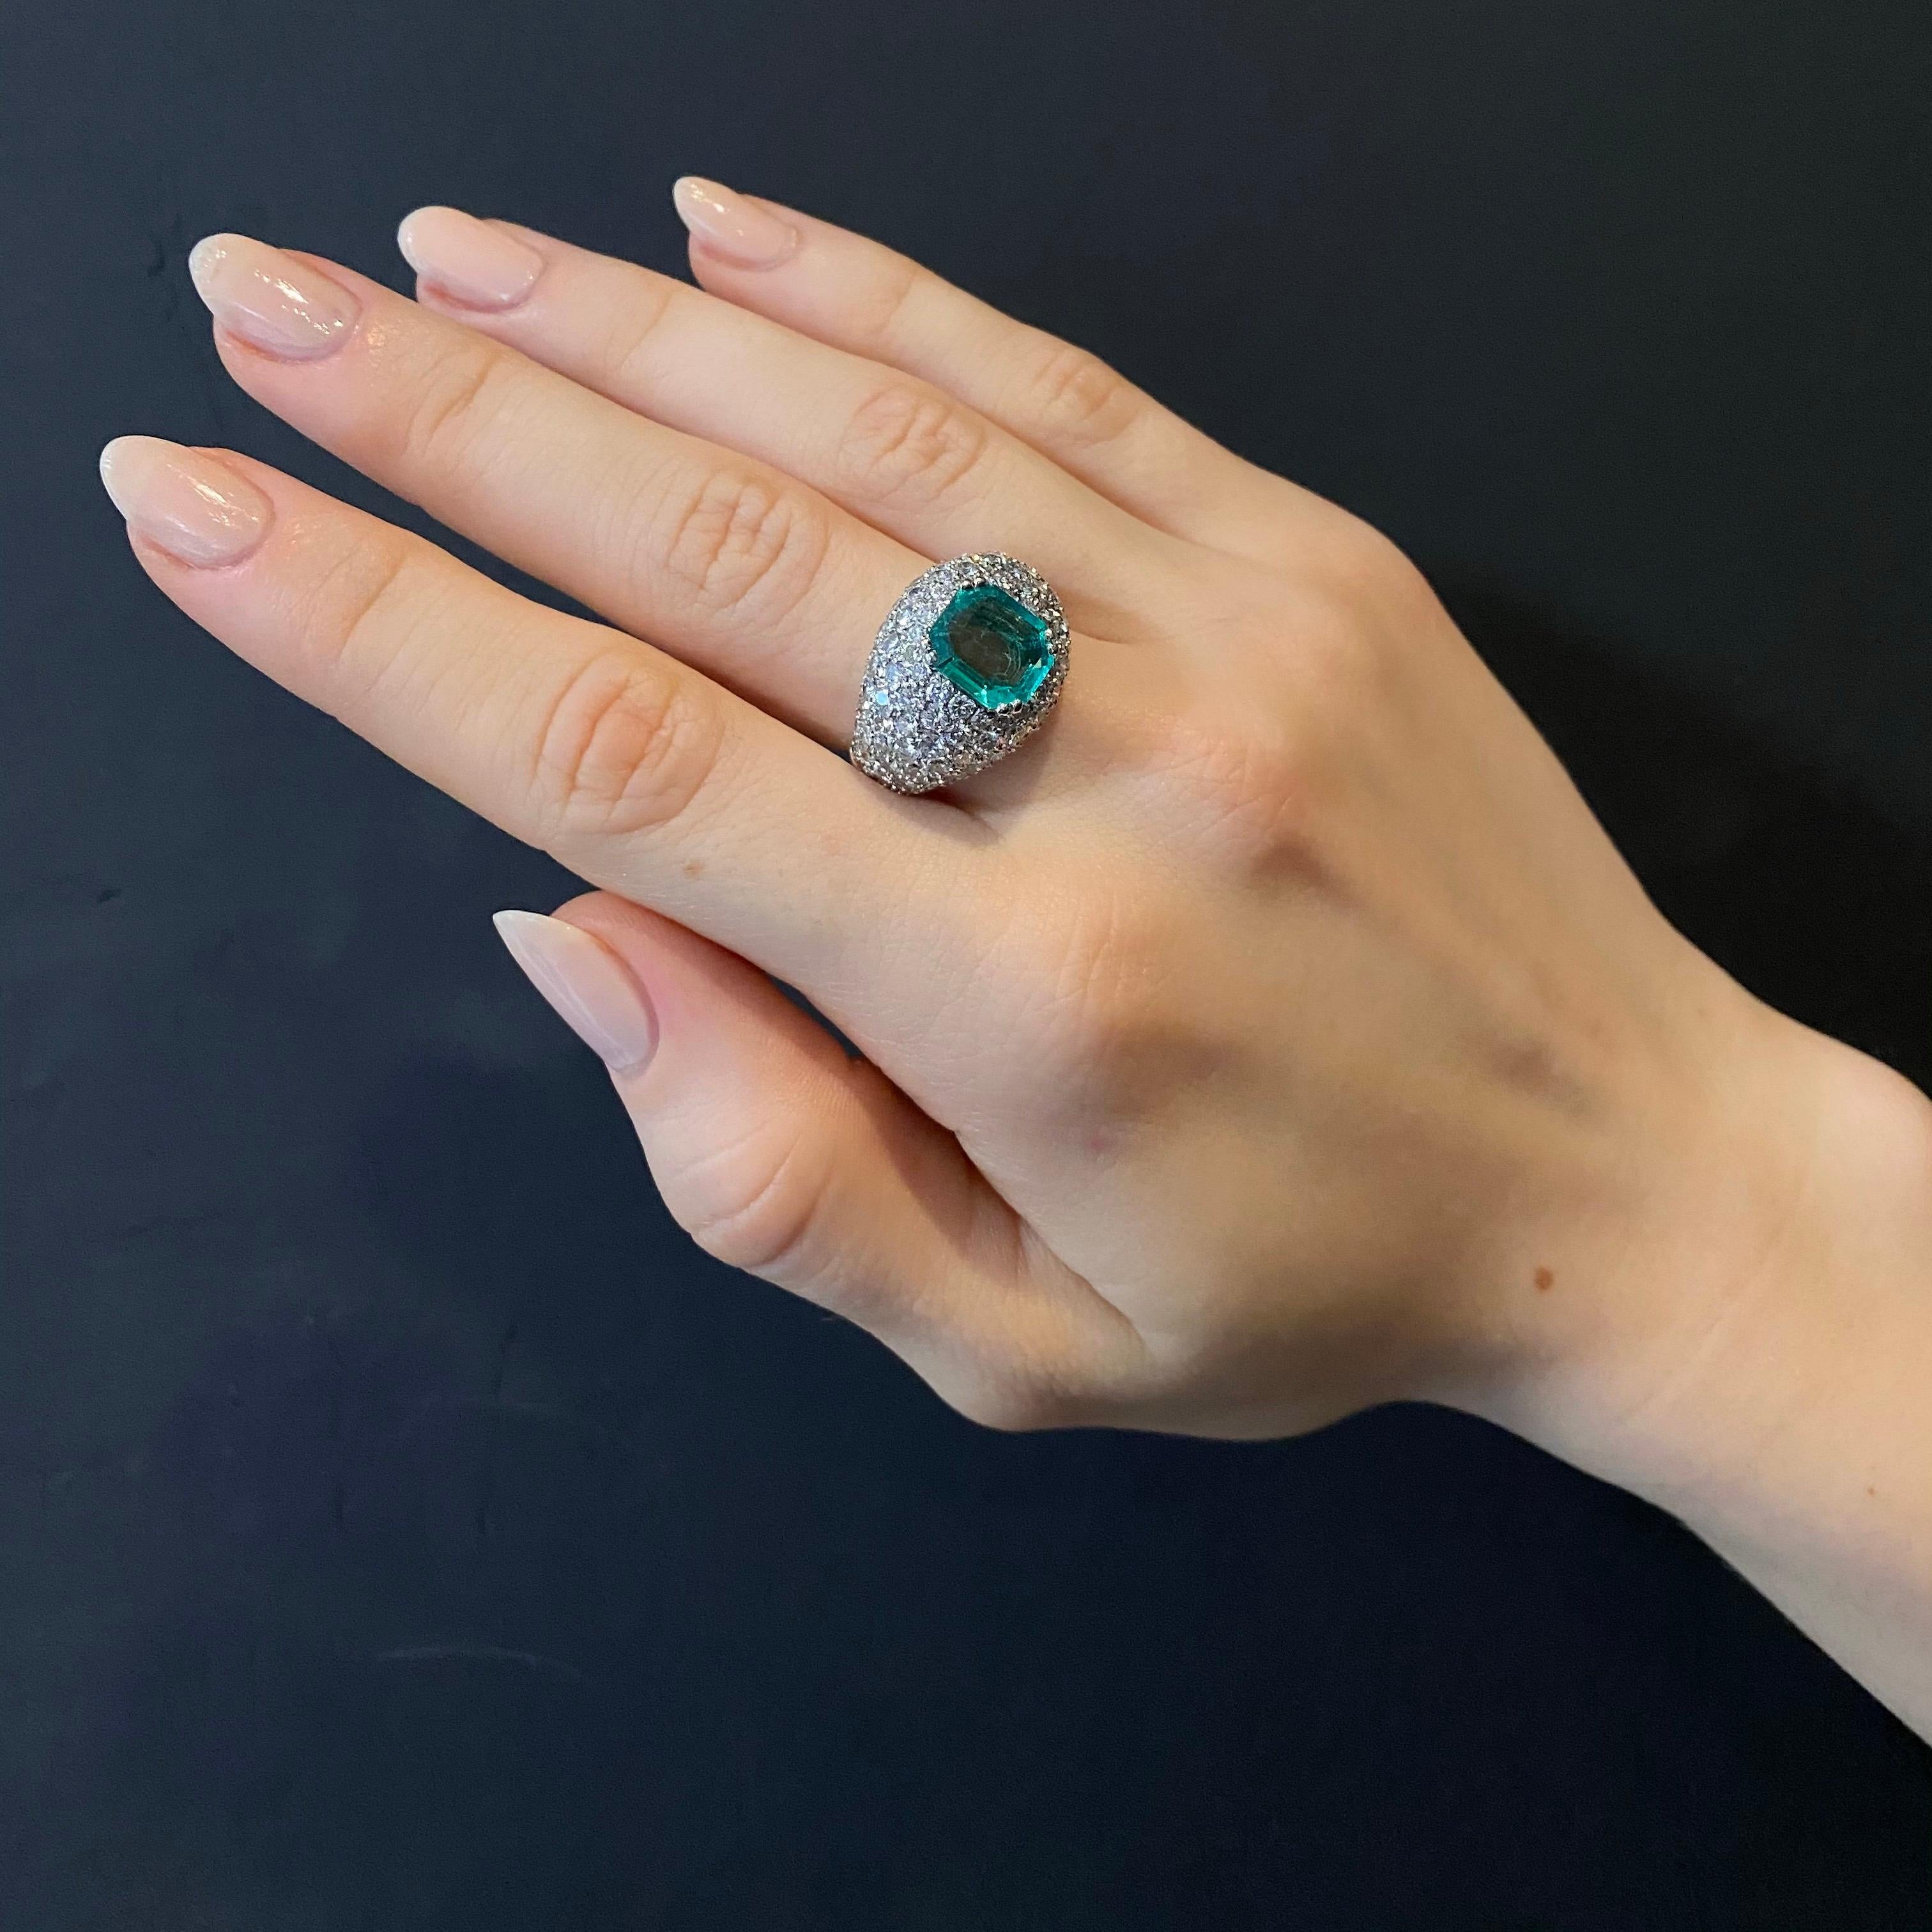 Vintage 1960s/1970s Colombian Emerald Diamond Bombe Cocktail Ring Platinum 4